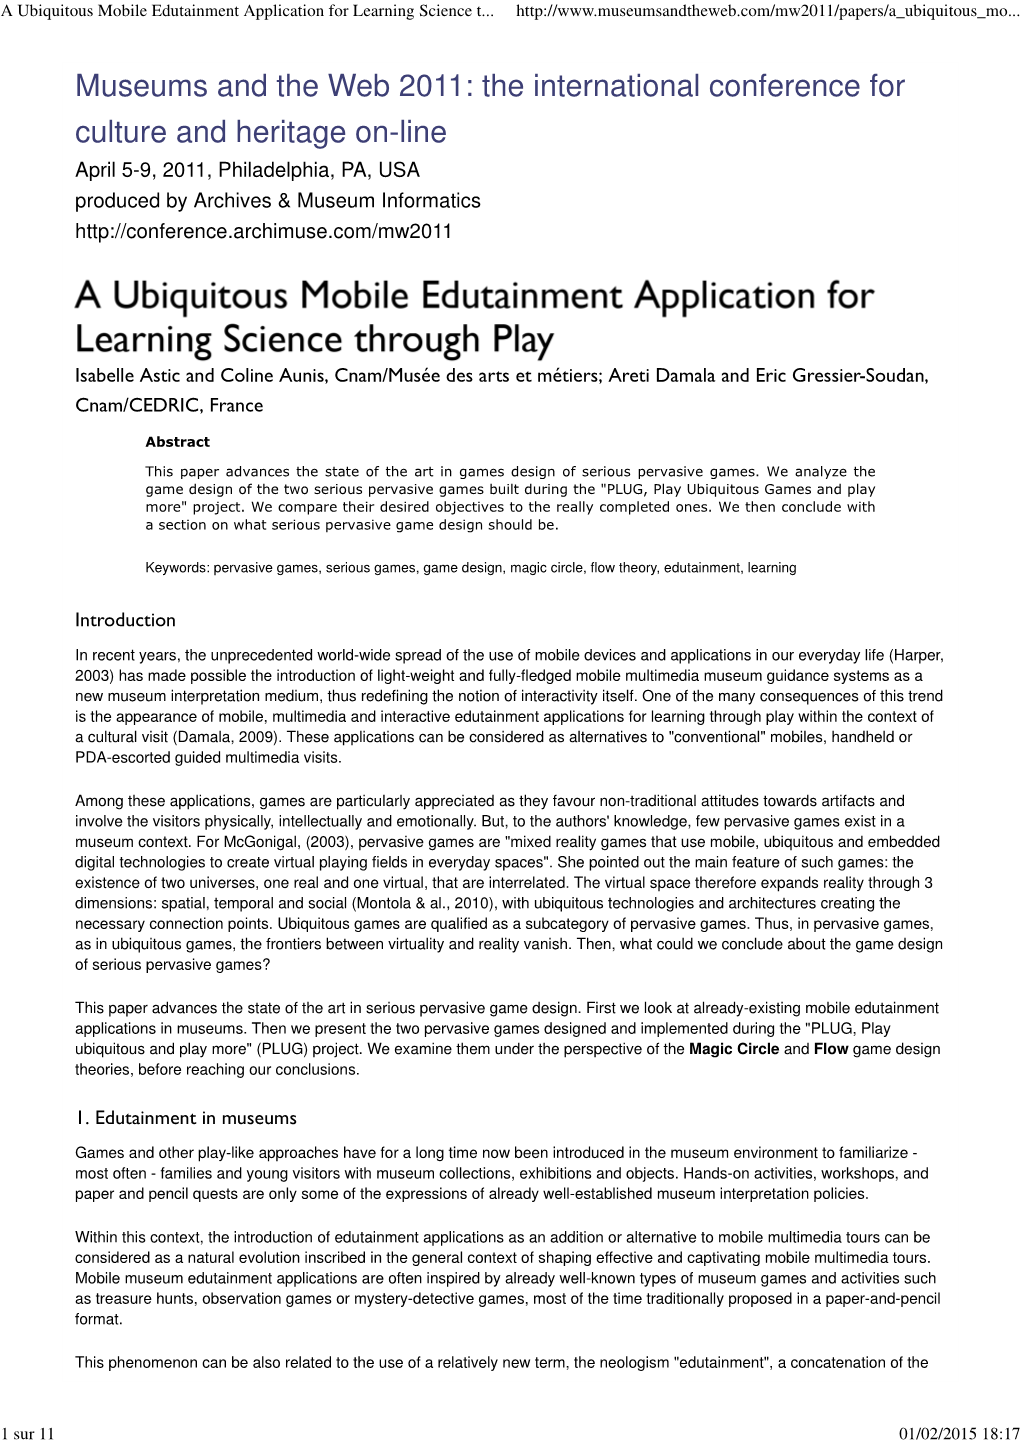 A Ubiquitous Mobile Edutainment Application for Learning Science T